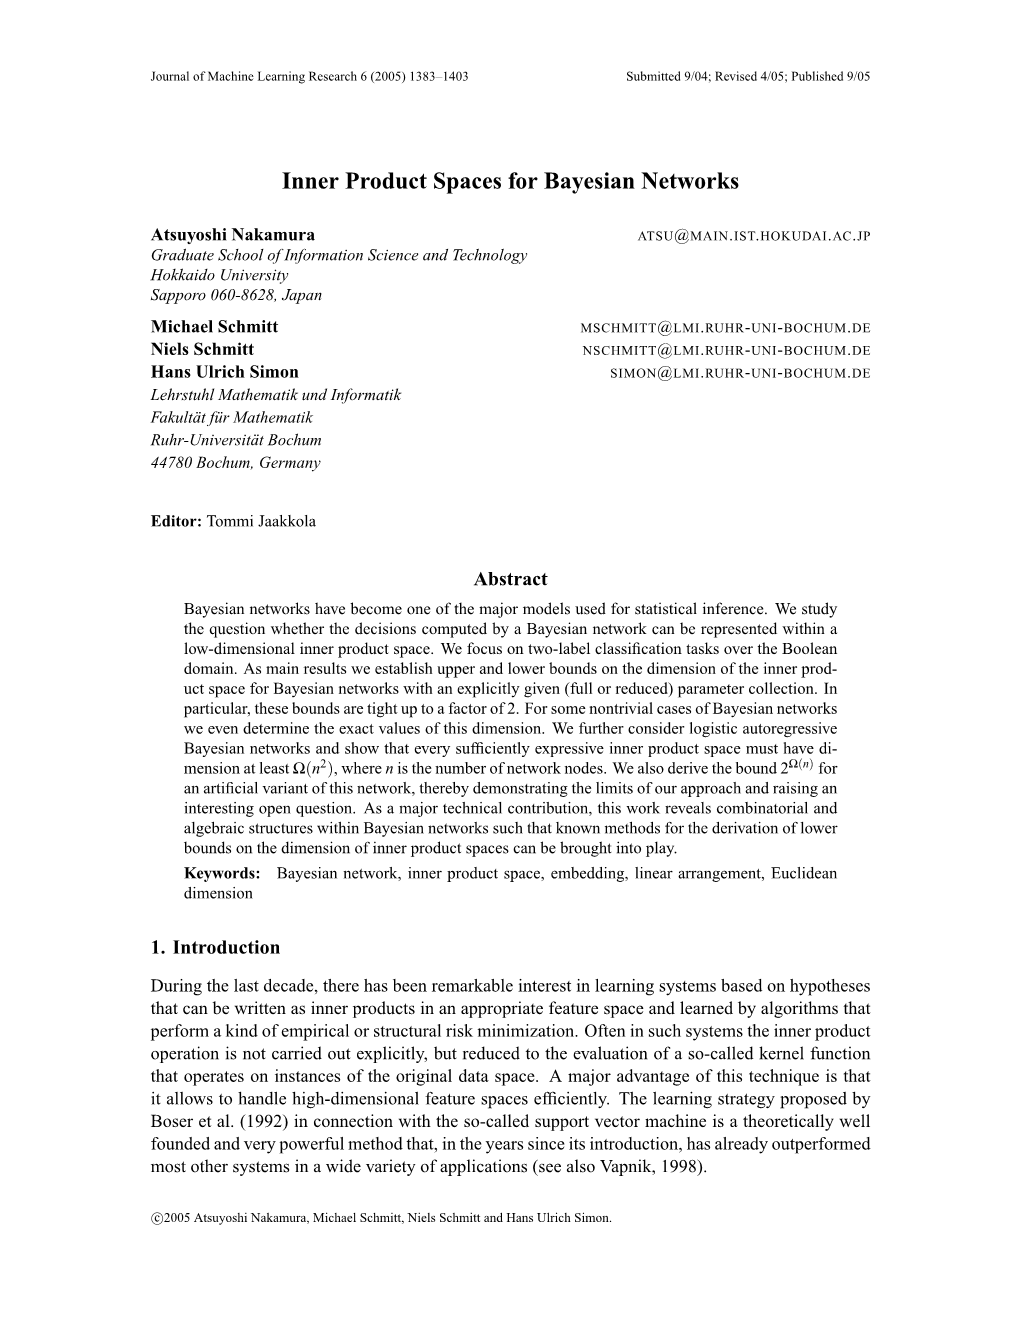 Inner Product Spaces for Bayesian Networks